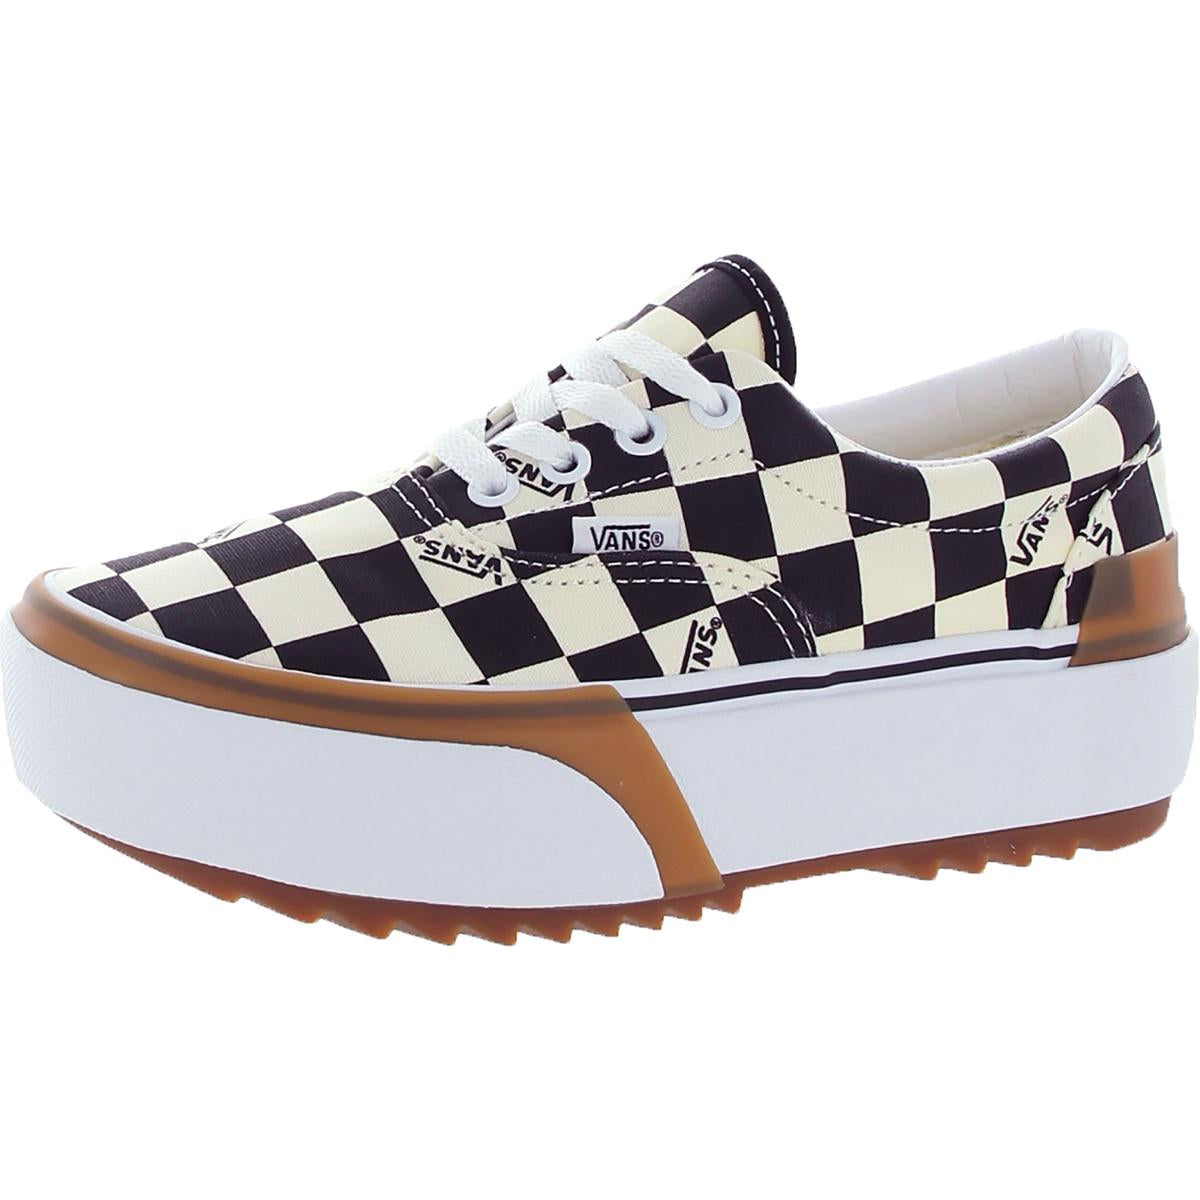 Era Stacked Womens Casual Fashion Skate Shoes